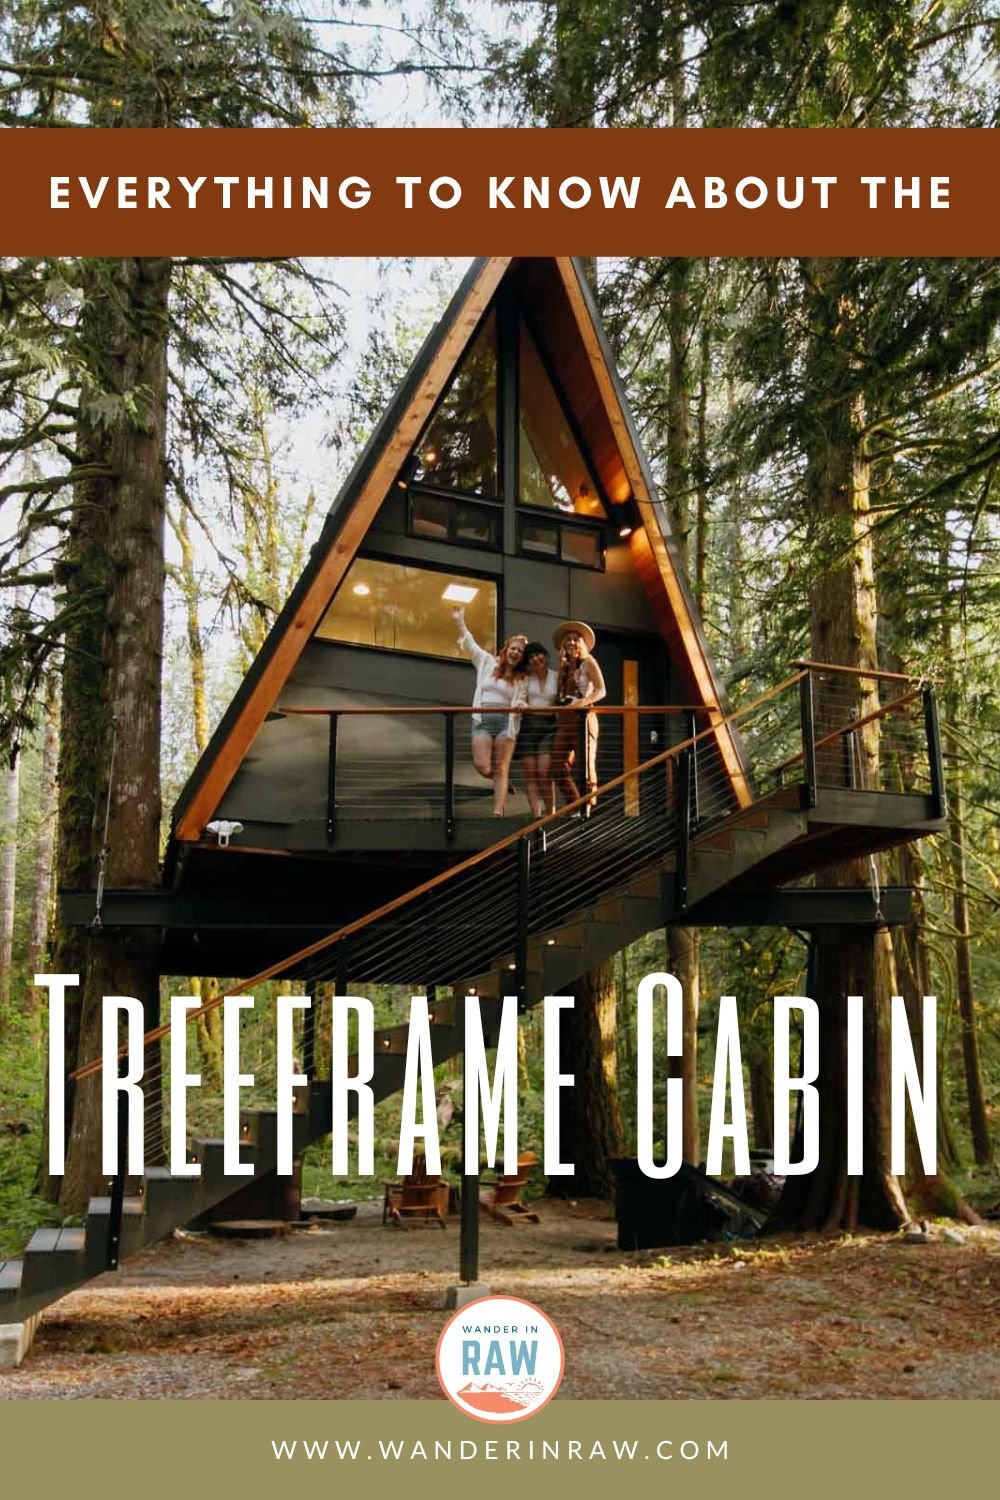 Unique Stay: The Treeframe Cabin is a Washington Tree House Rental You Won't Forget!